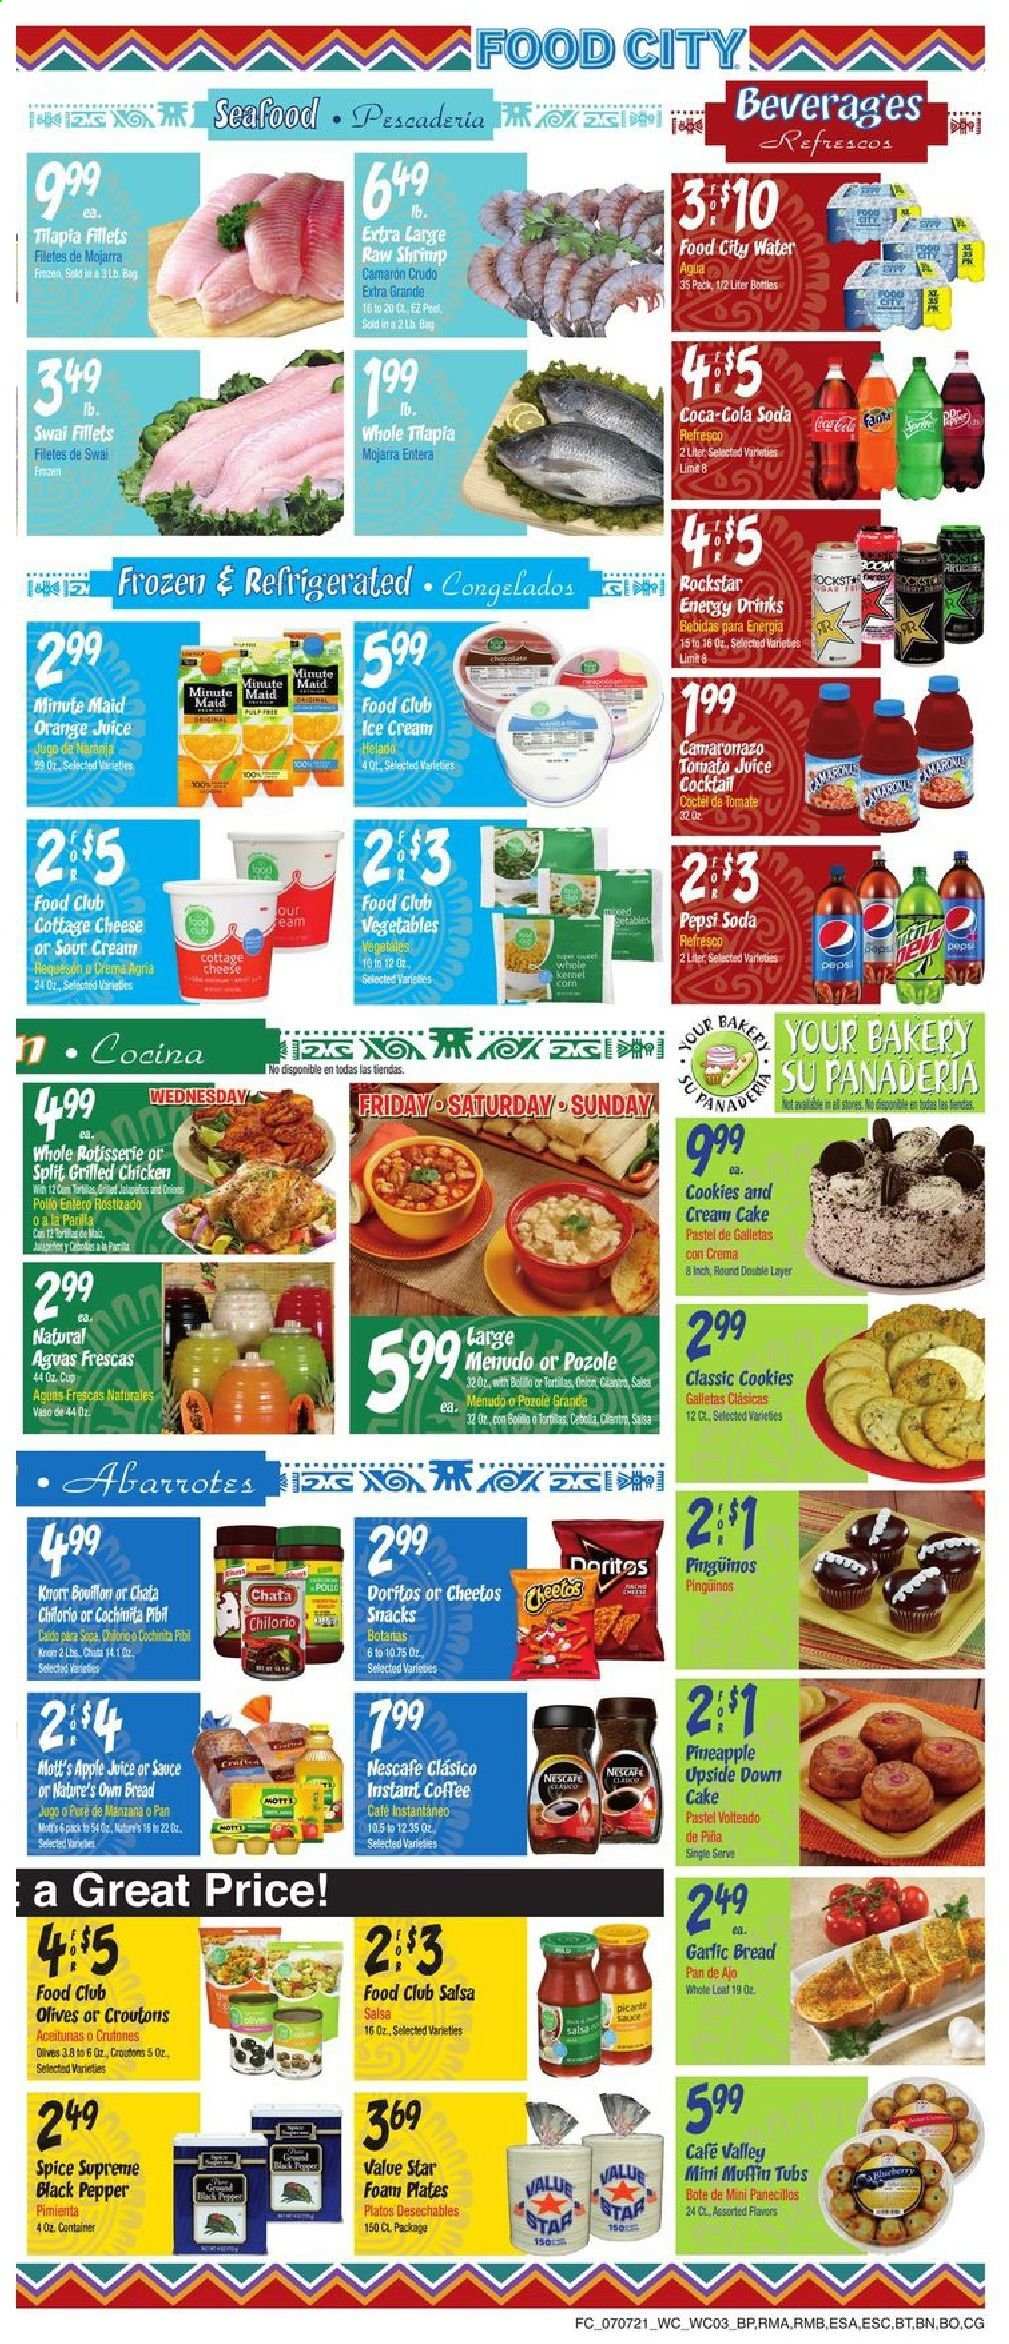 thumbnail - Food City Flyer - 07/07/2021 - 07/13/2021 - Sales products - bread, cake, onion, Mott's, tilapia, seafood, swai fillet, cottage cheese, sour cream, ice cream, cookies, snack, Cheetos, croutons, olives, black pepper, spice, salsa, Coca-Cola, tomato juice, Pepsi, orange juice, juice, energy drink, Rockstar, fruit punch, soda, instant coffee, Nescafé, Nature's Own. Page 3.